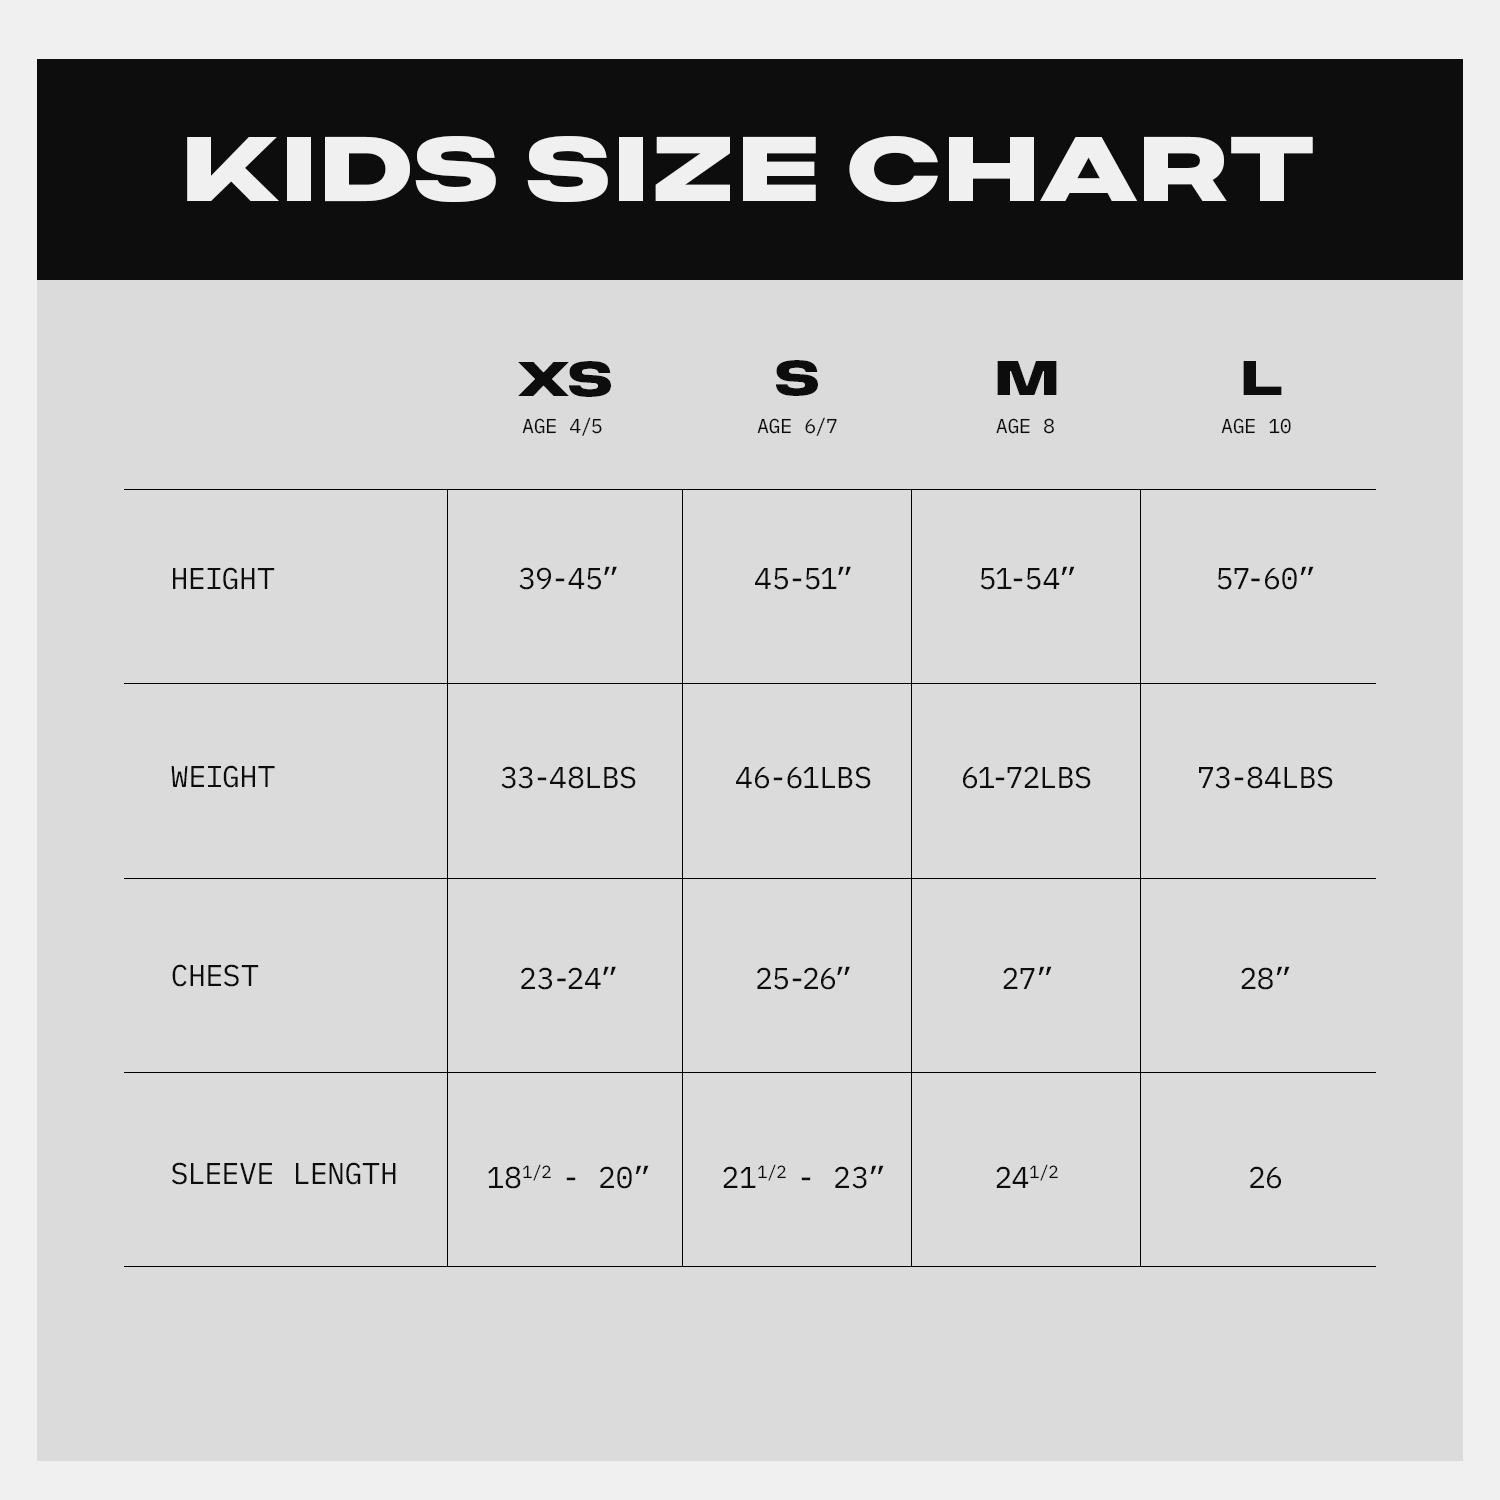 DO YOU HAVE A KID'S SIZE CHART AVAILABLE? – The Legends Brand